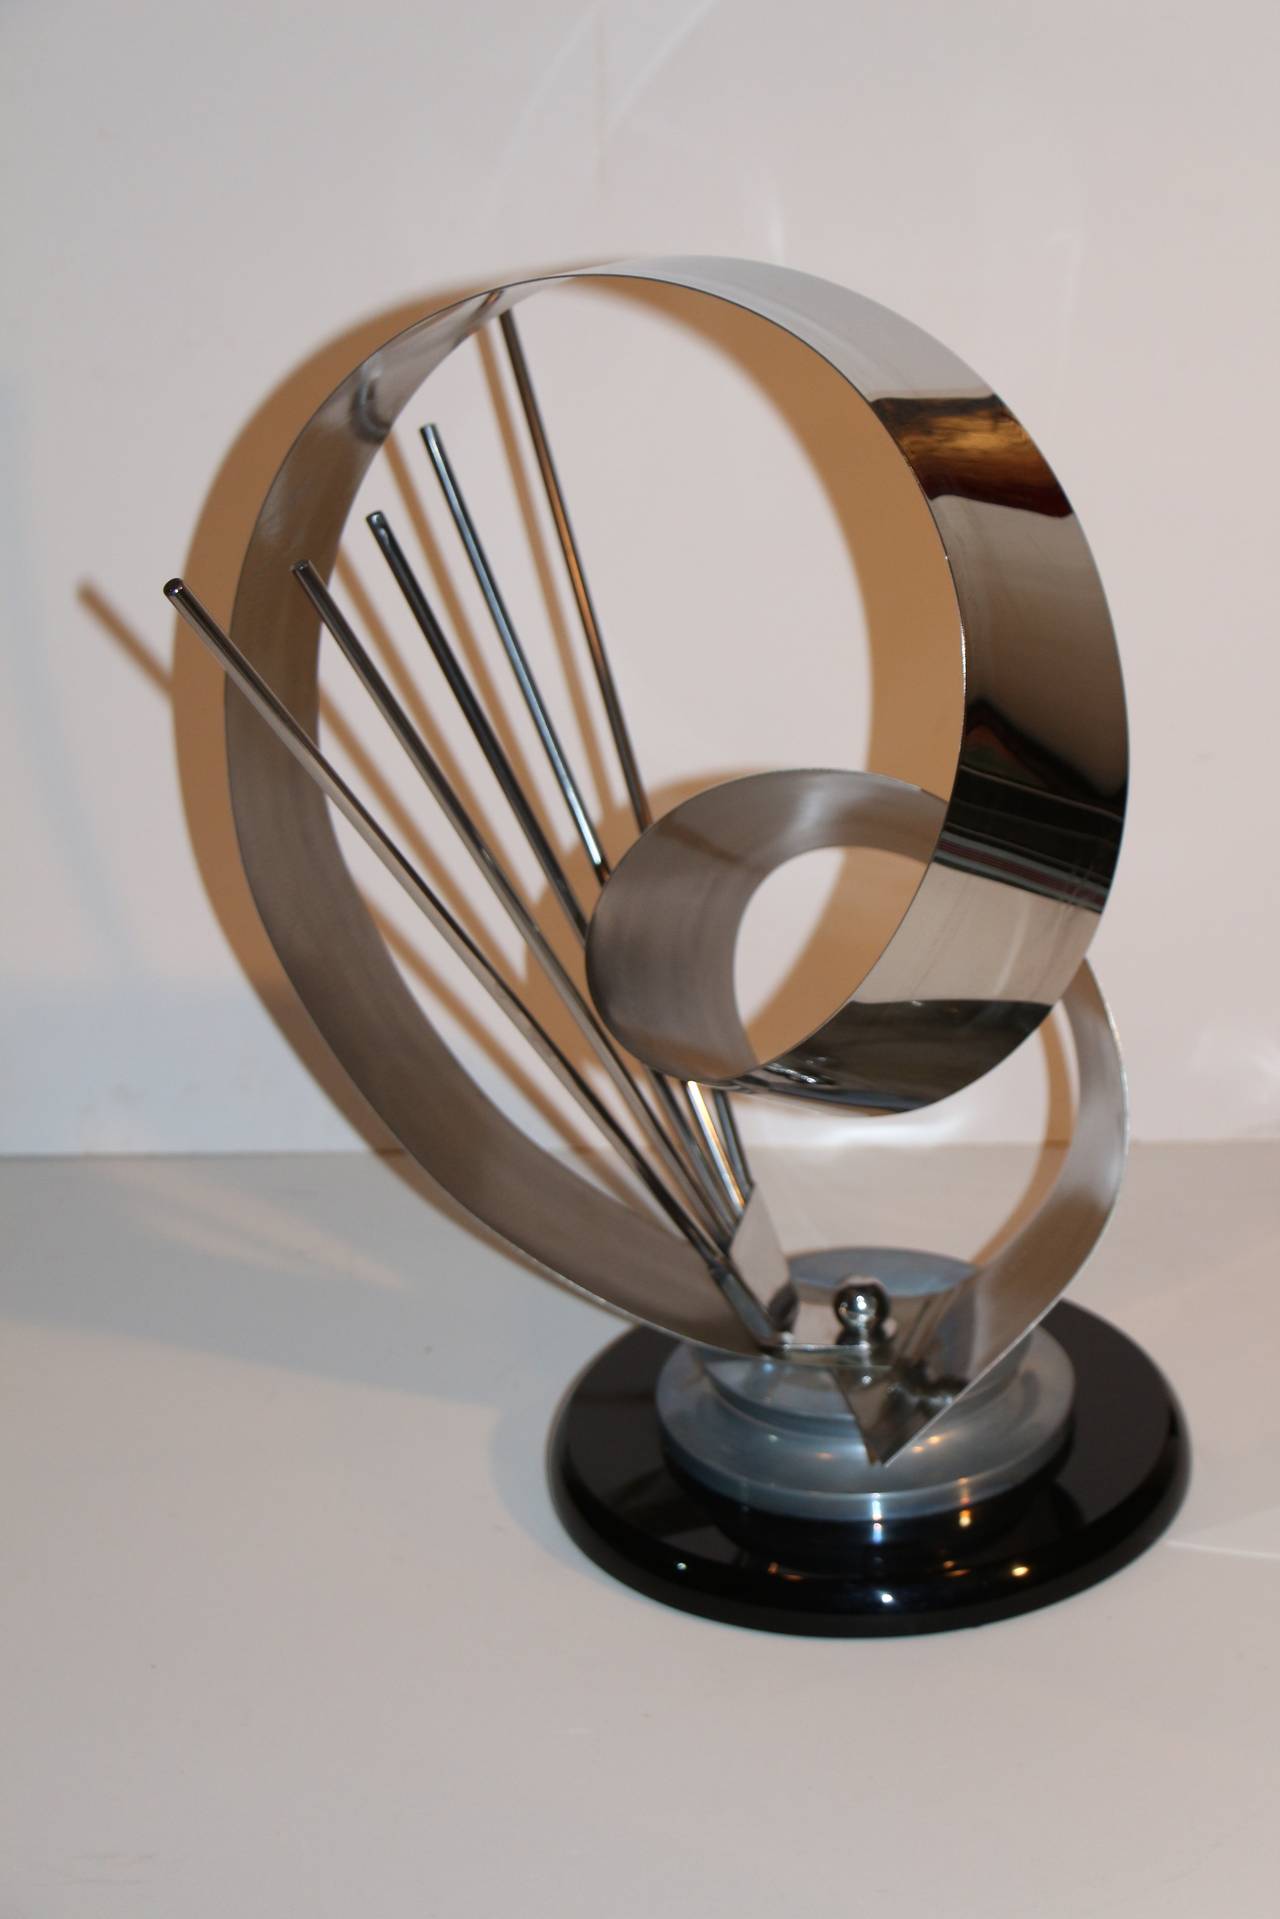 A signed Shlomi Haziza metal sculpture. It is etched with the artist's signature and also bears his firm's label. Nice piece with a bit of Kinetic energy to it, as the ribbon part moves around.